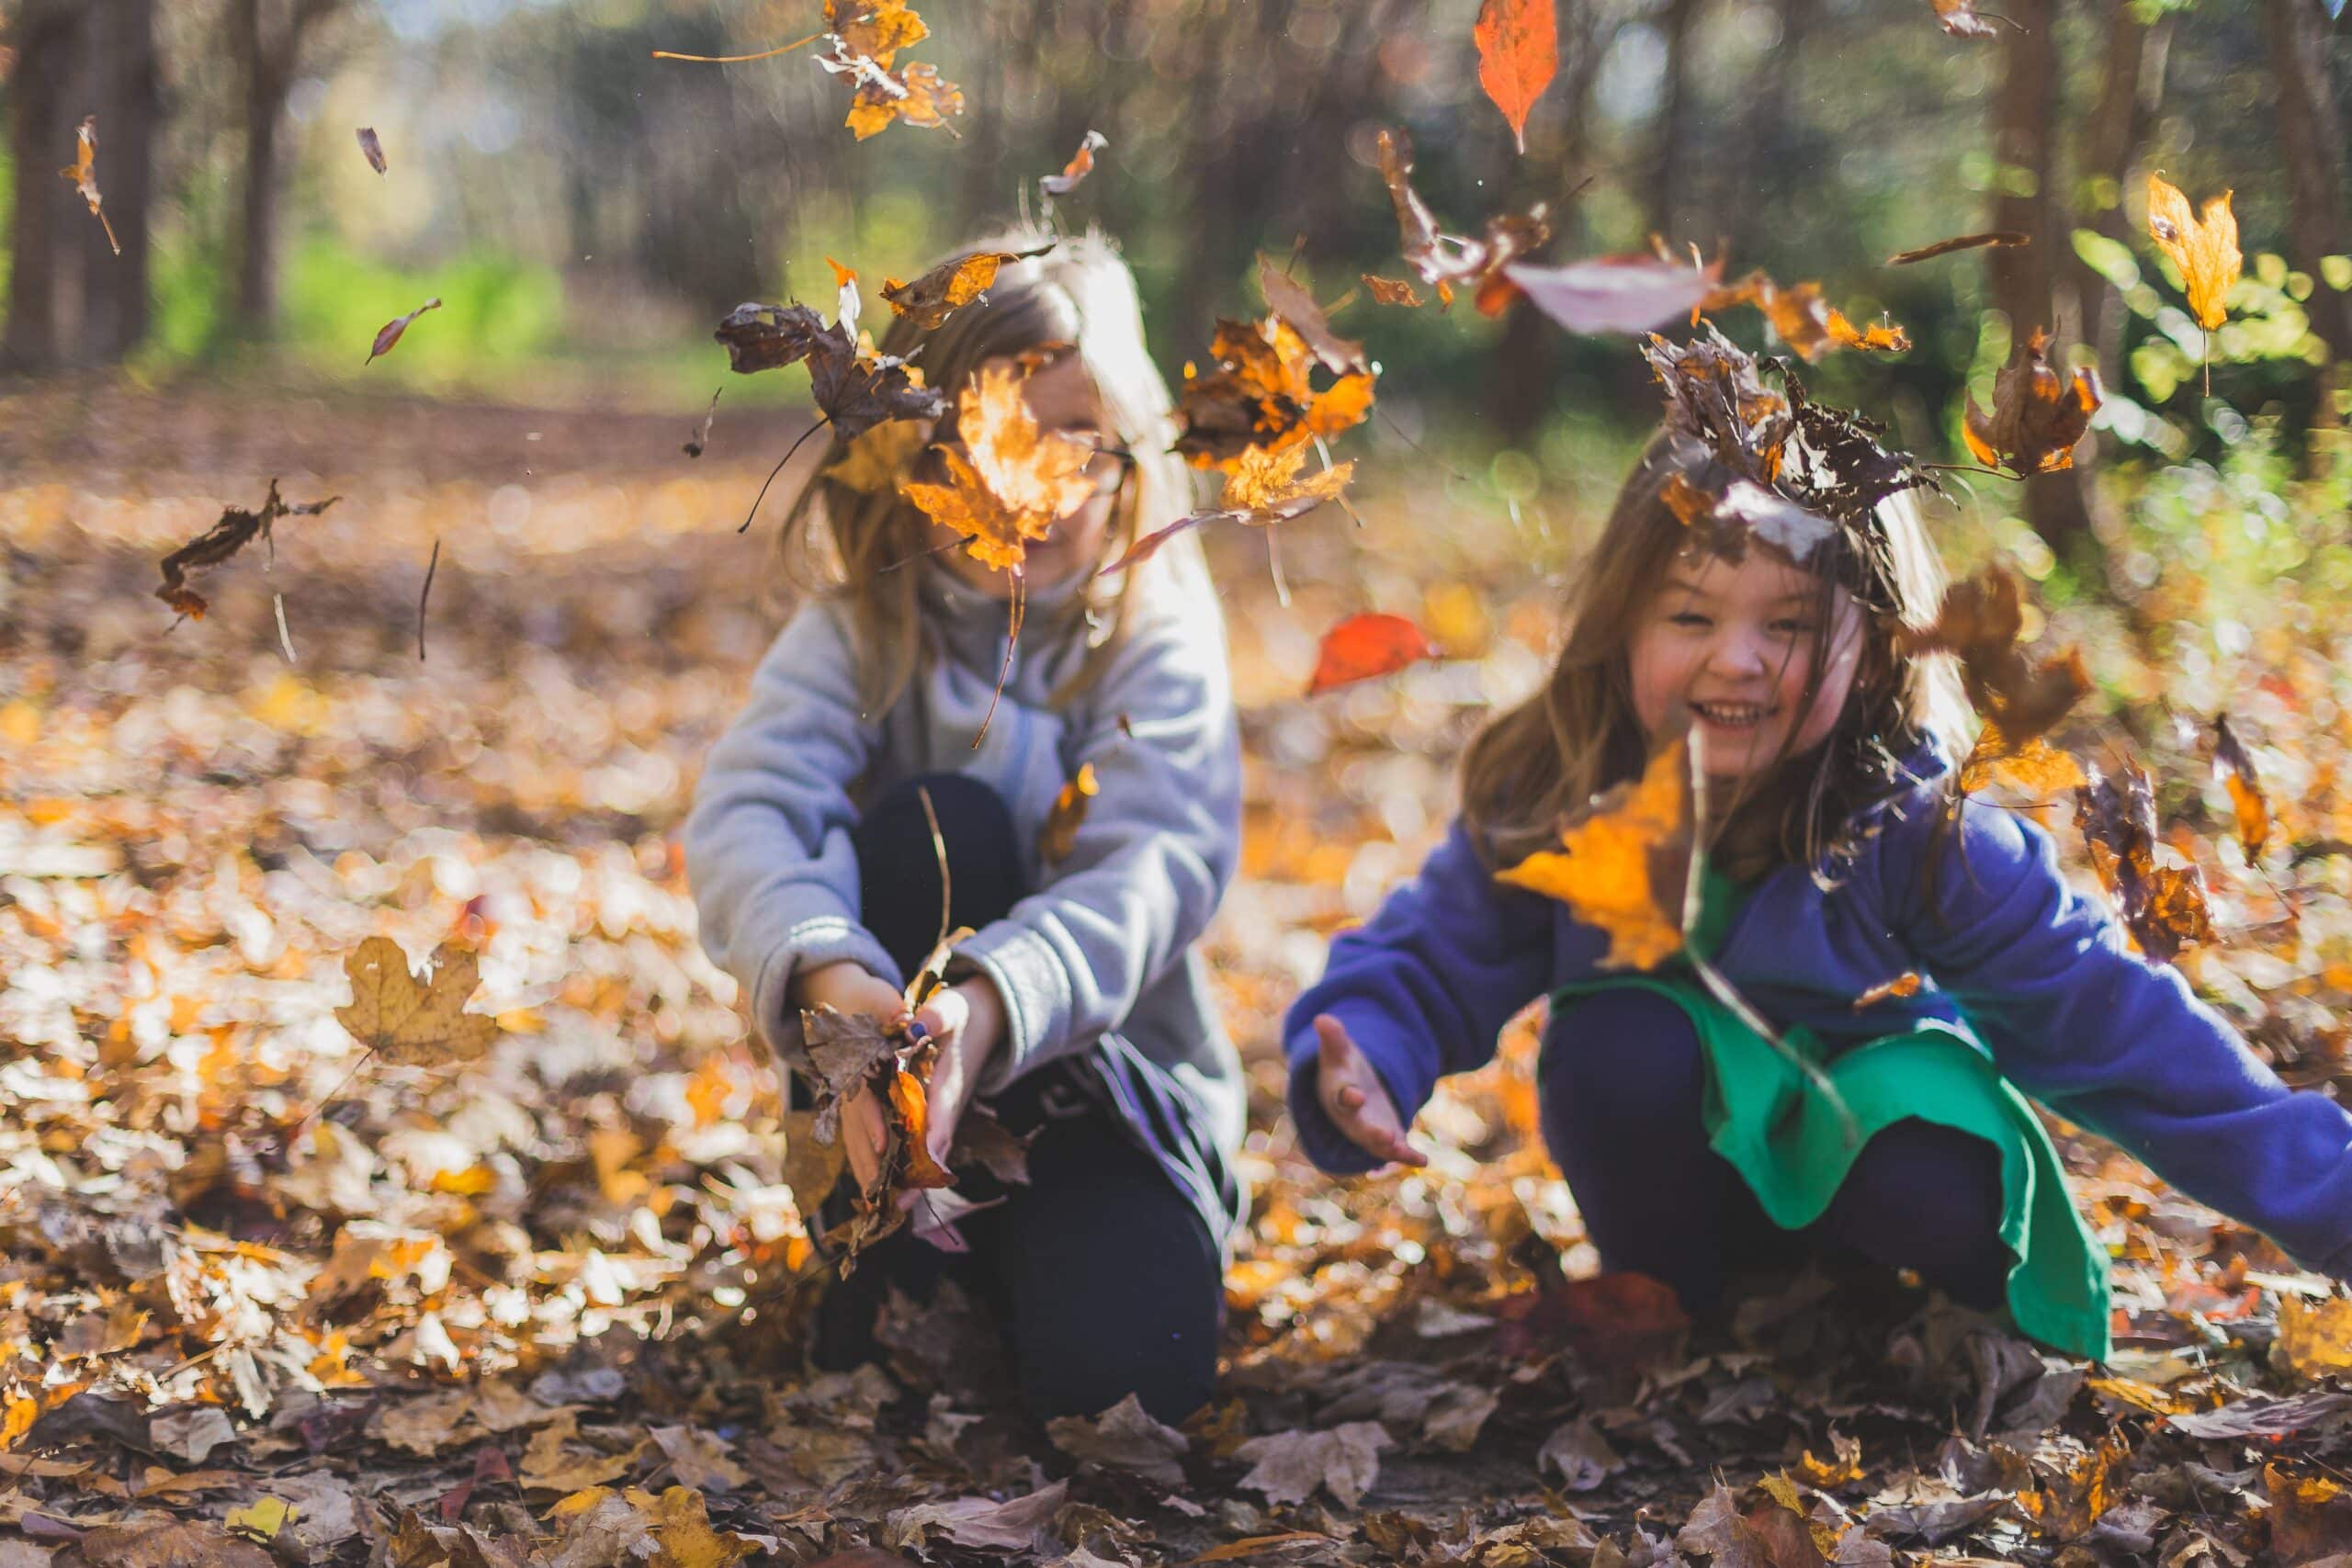 Two girls joyfully playing with autumn leaves near the woods